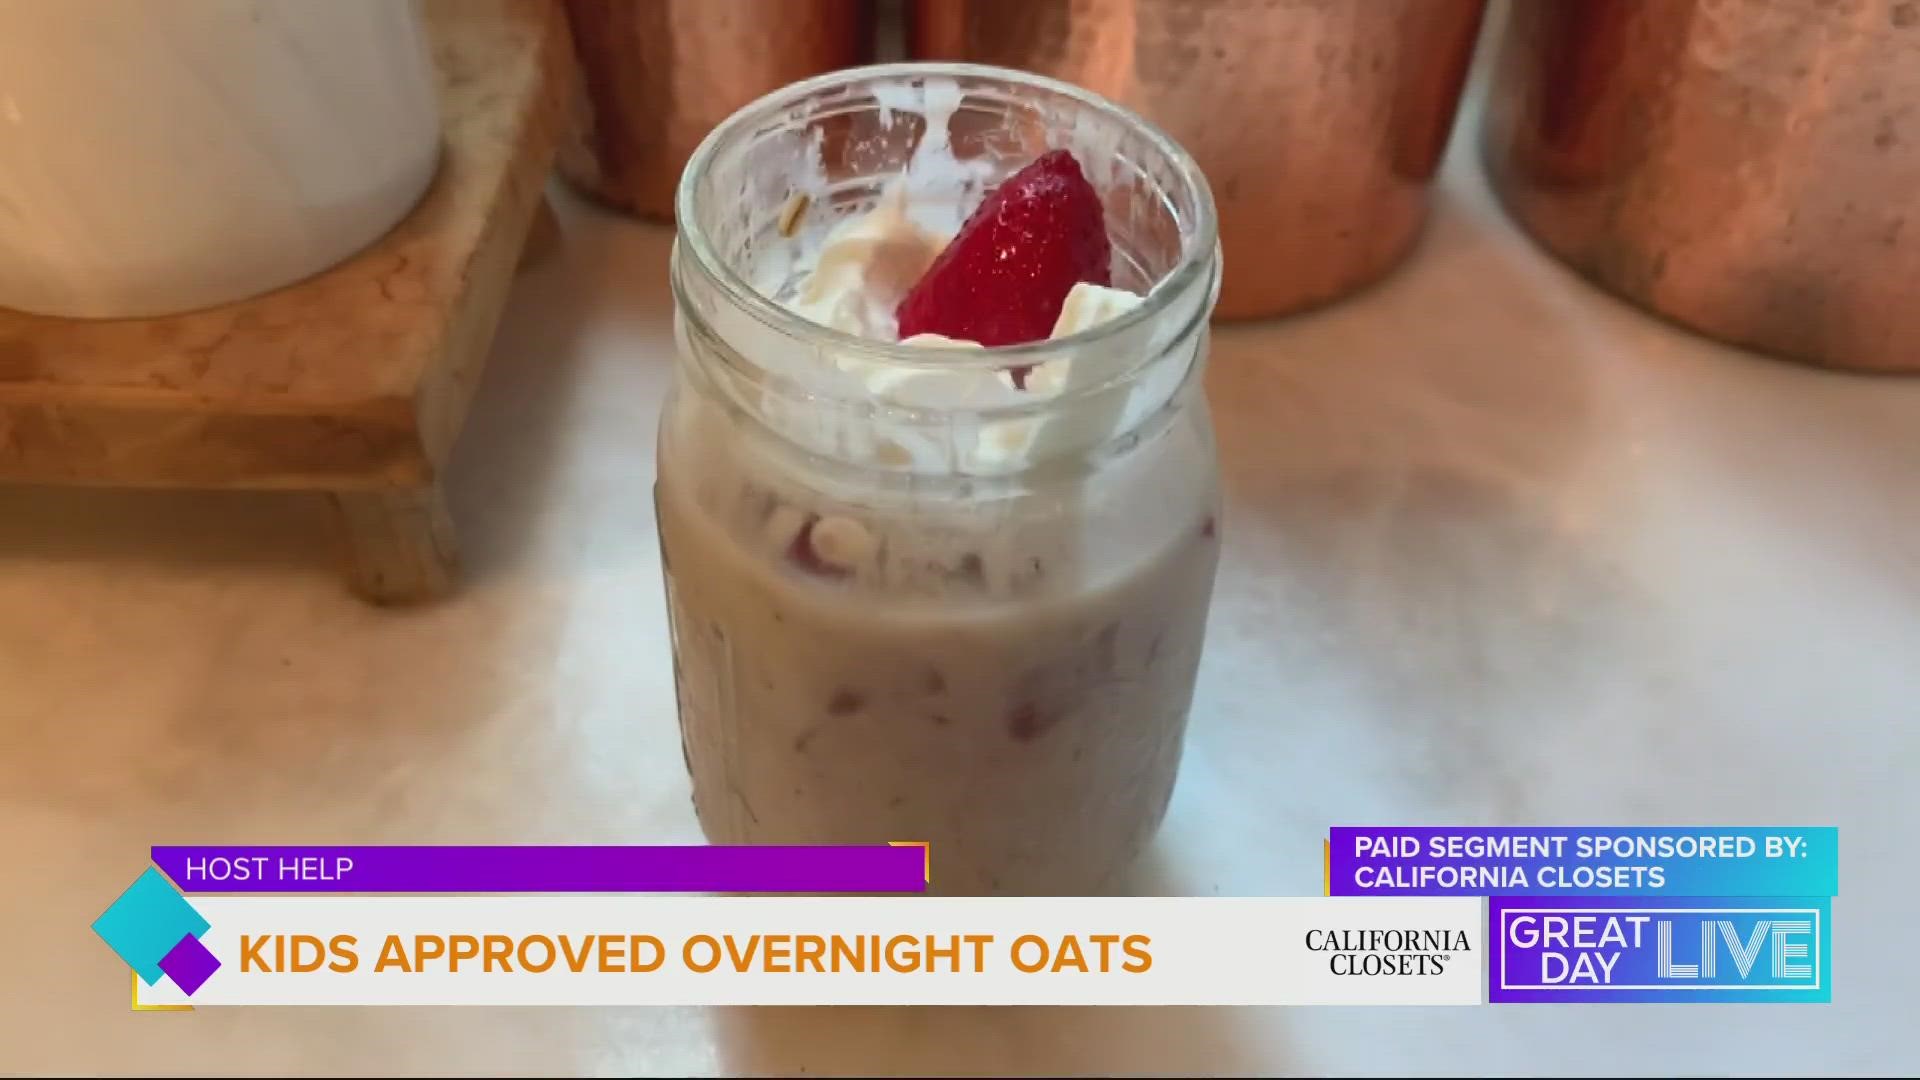 In this week’s Host Help sponsored by California Closets, Janelle shares two easy, overnight-oats recipes kids will love.